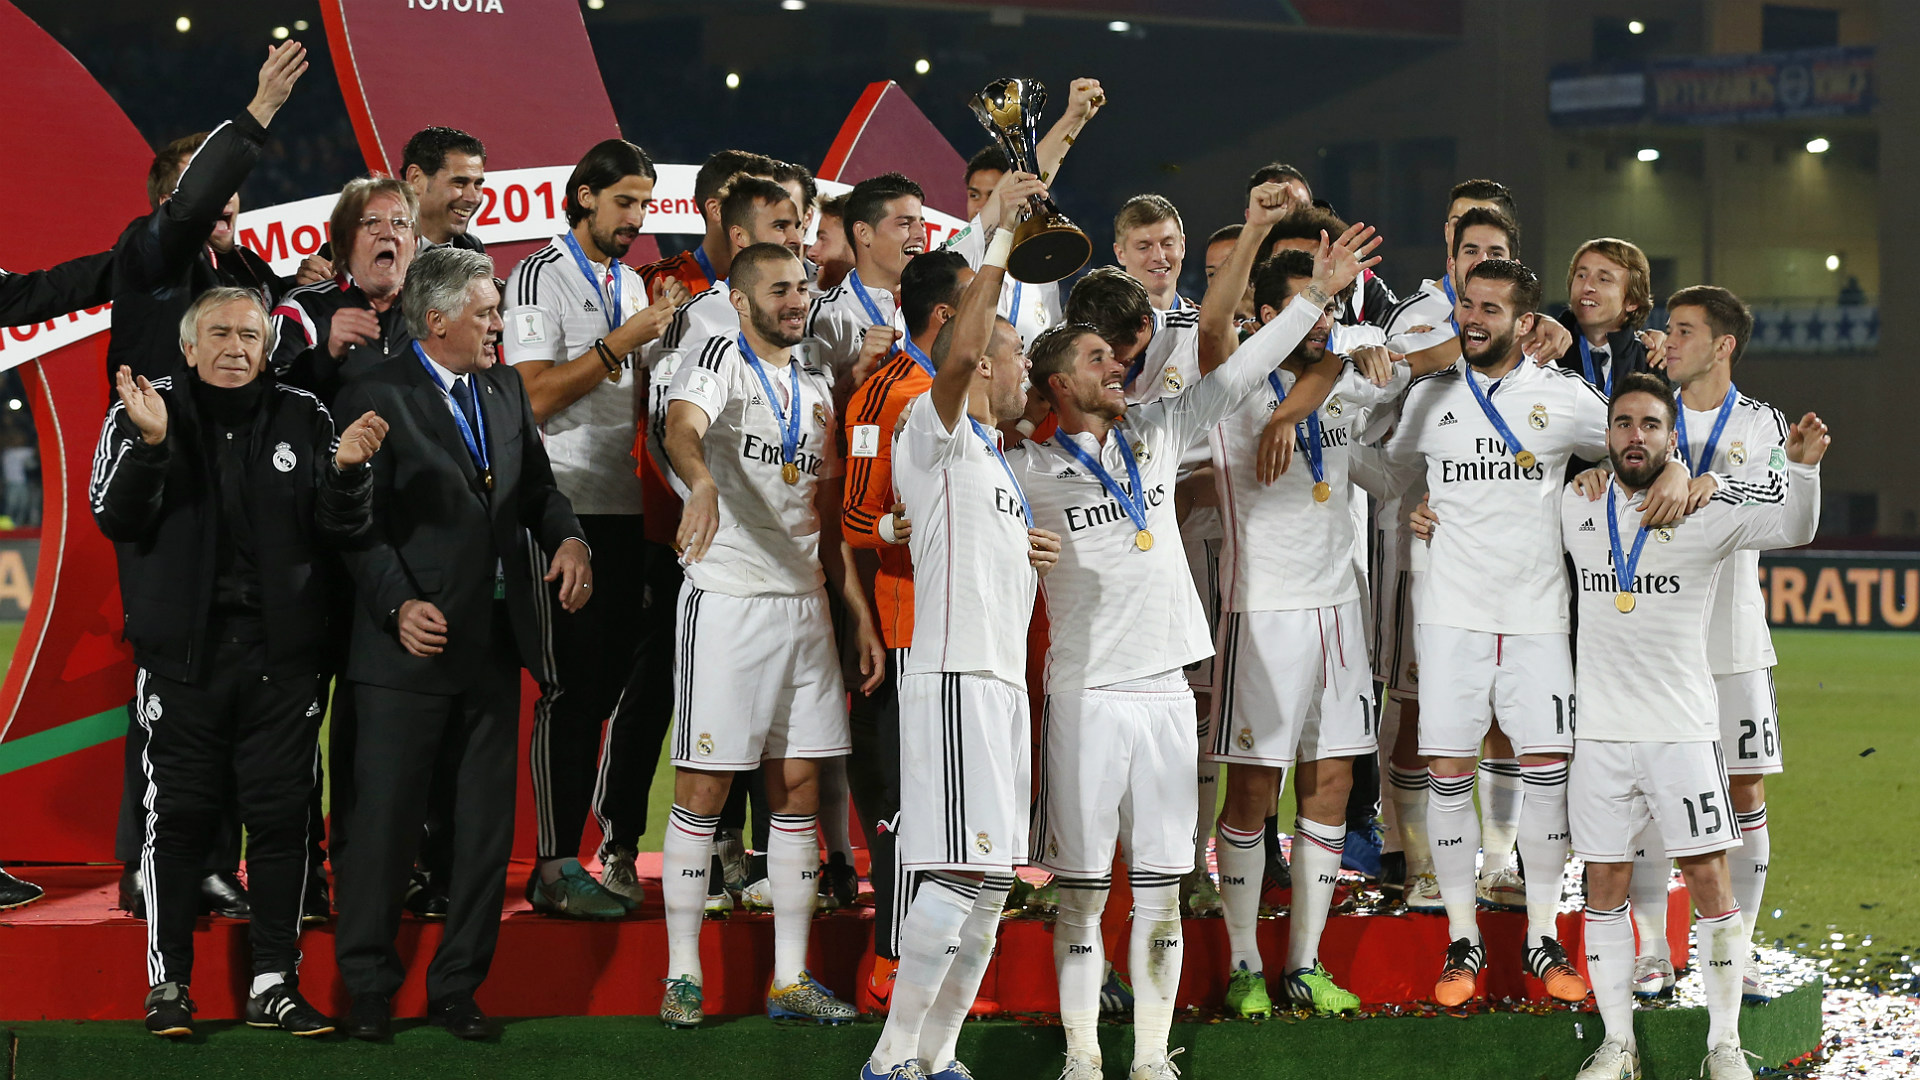 Real+Madrid+confirms+participation+in+the+Club+World+Cup+after+comments+from+Ancelotti+%26%238211%3B+India+prospects